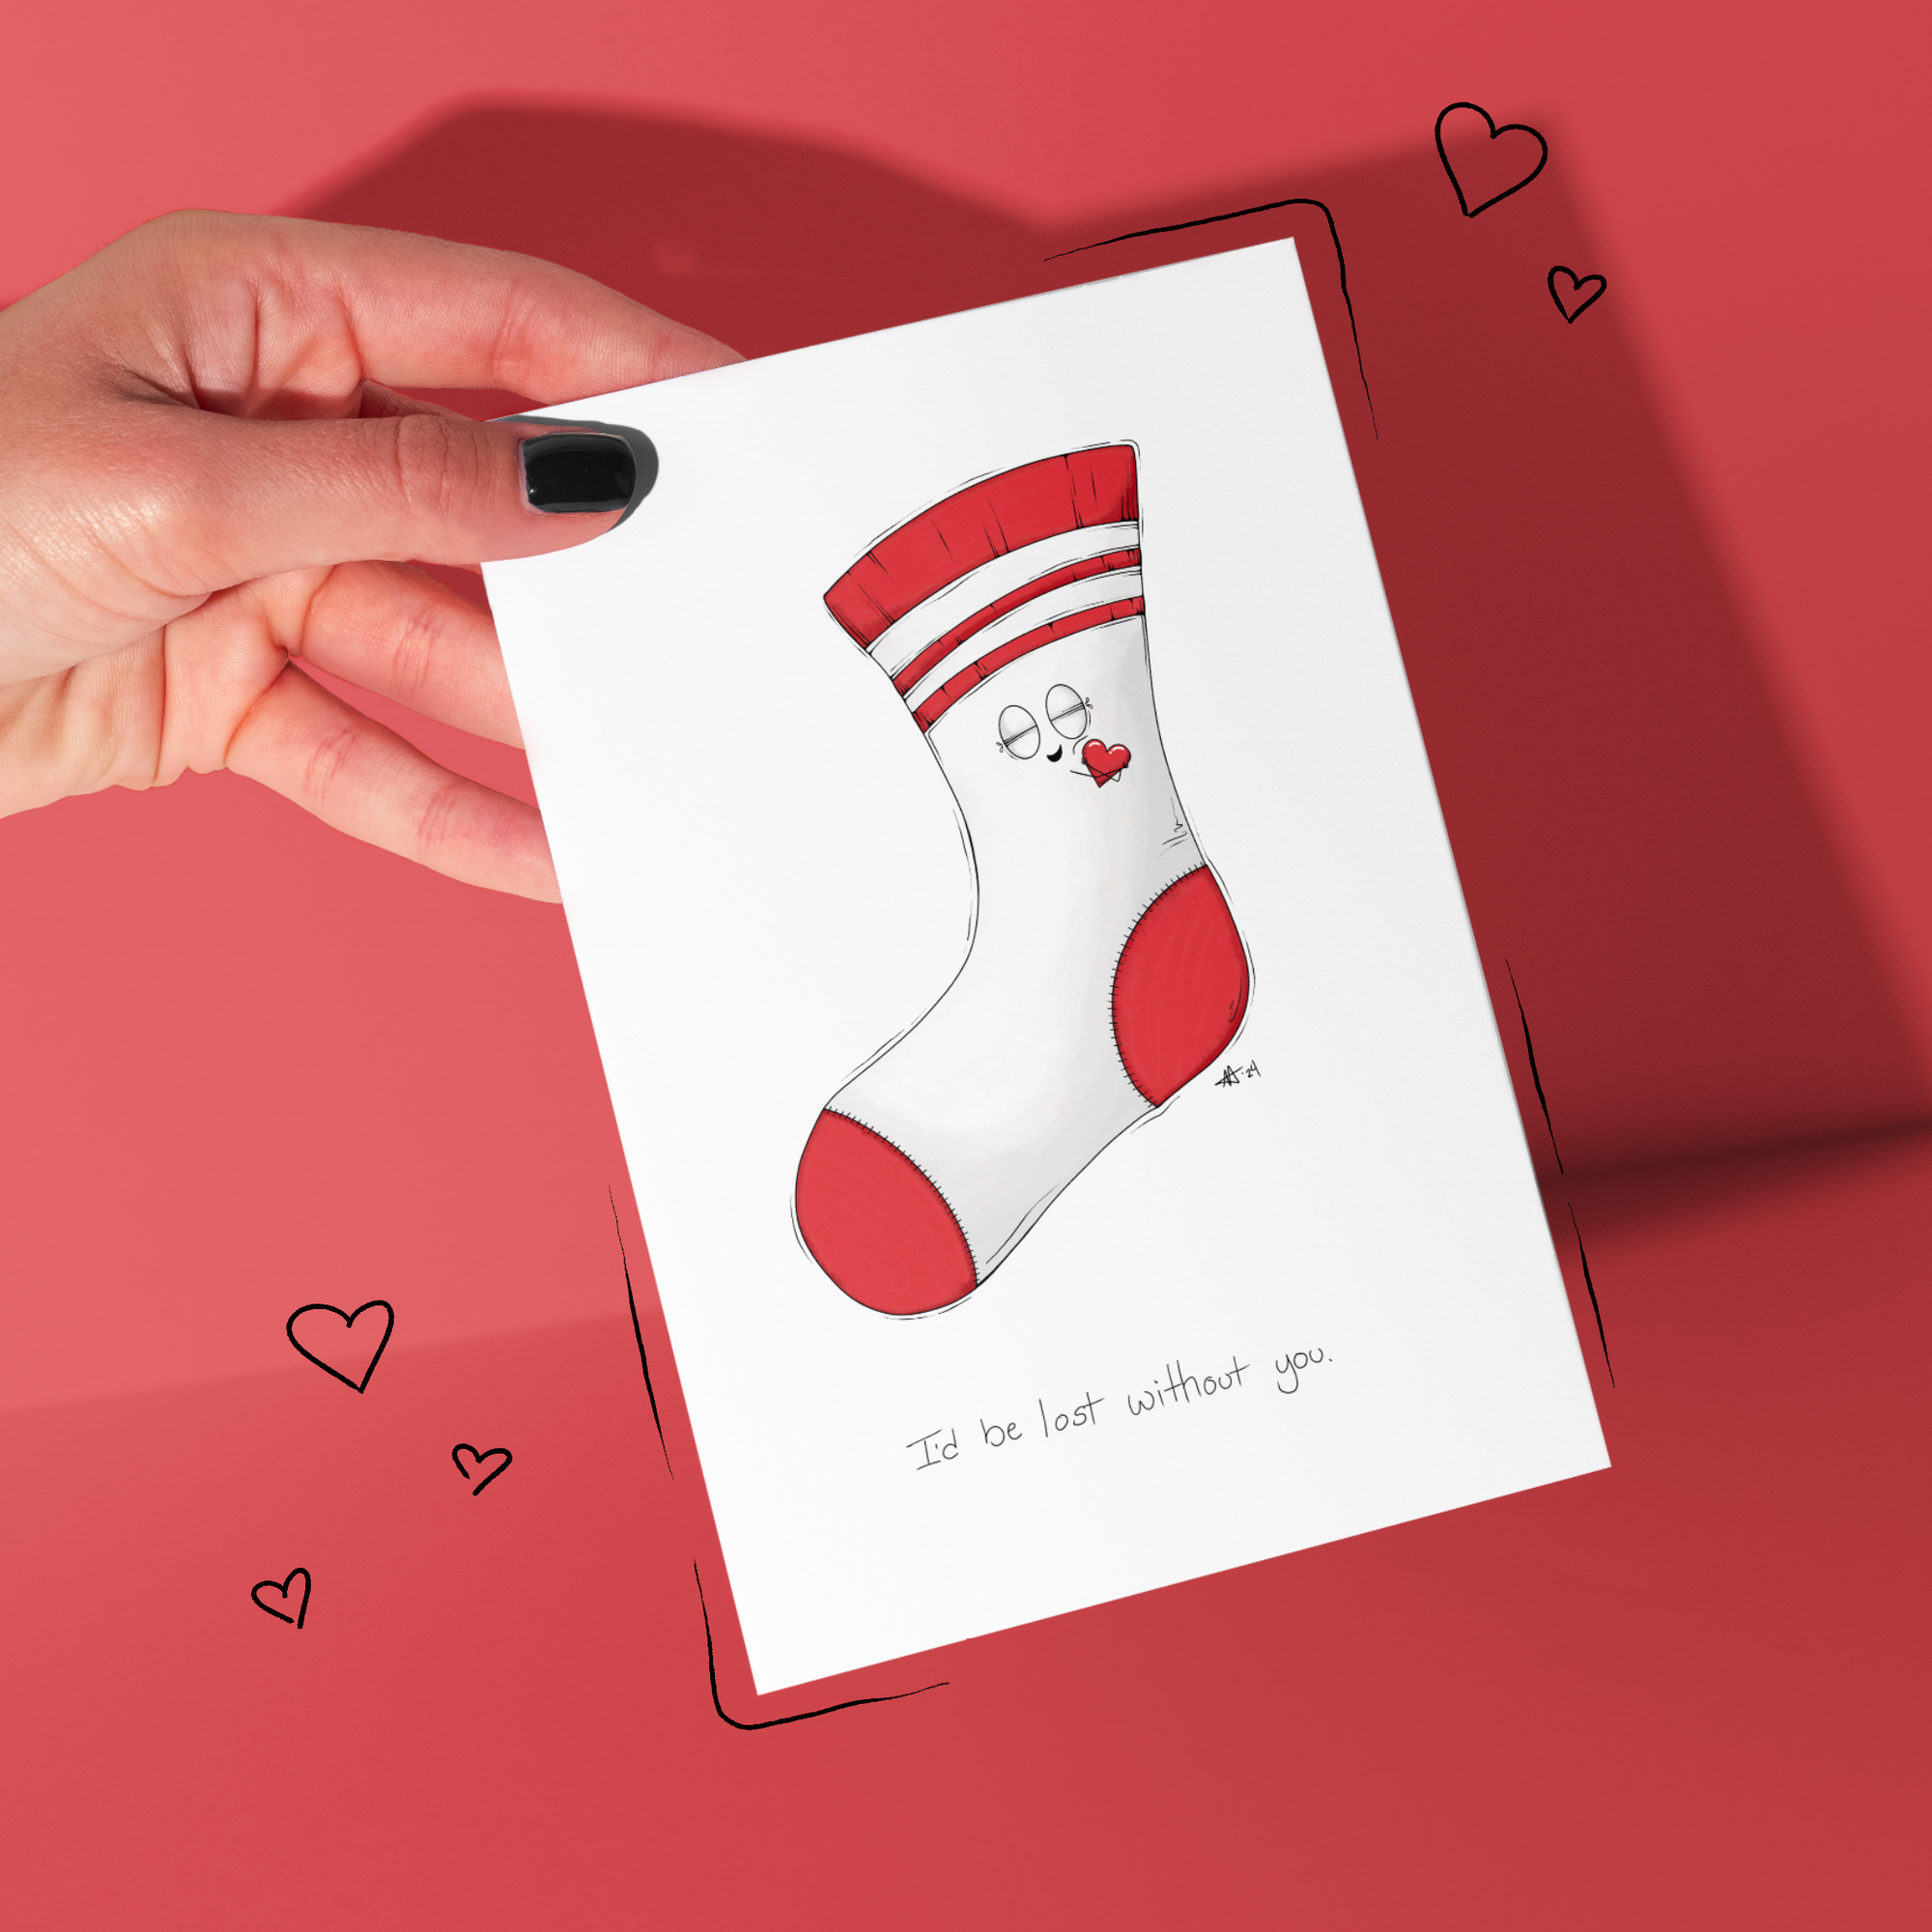 "I'd be lost without you." - Greeting Card / Small Print